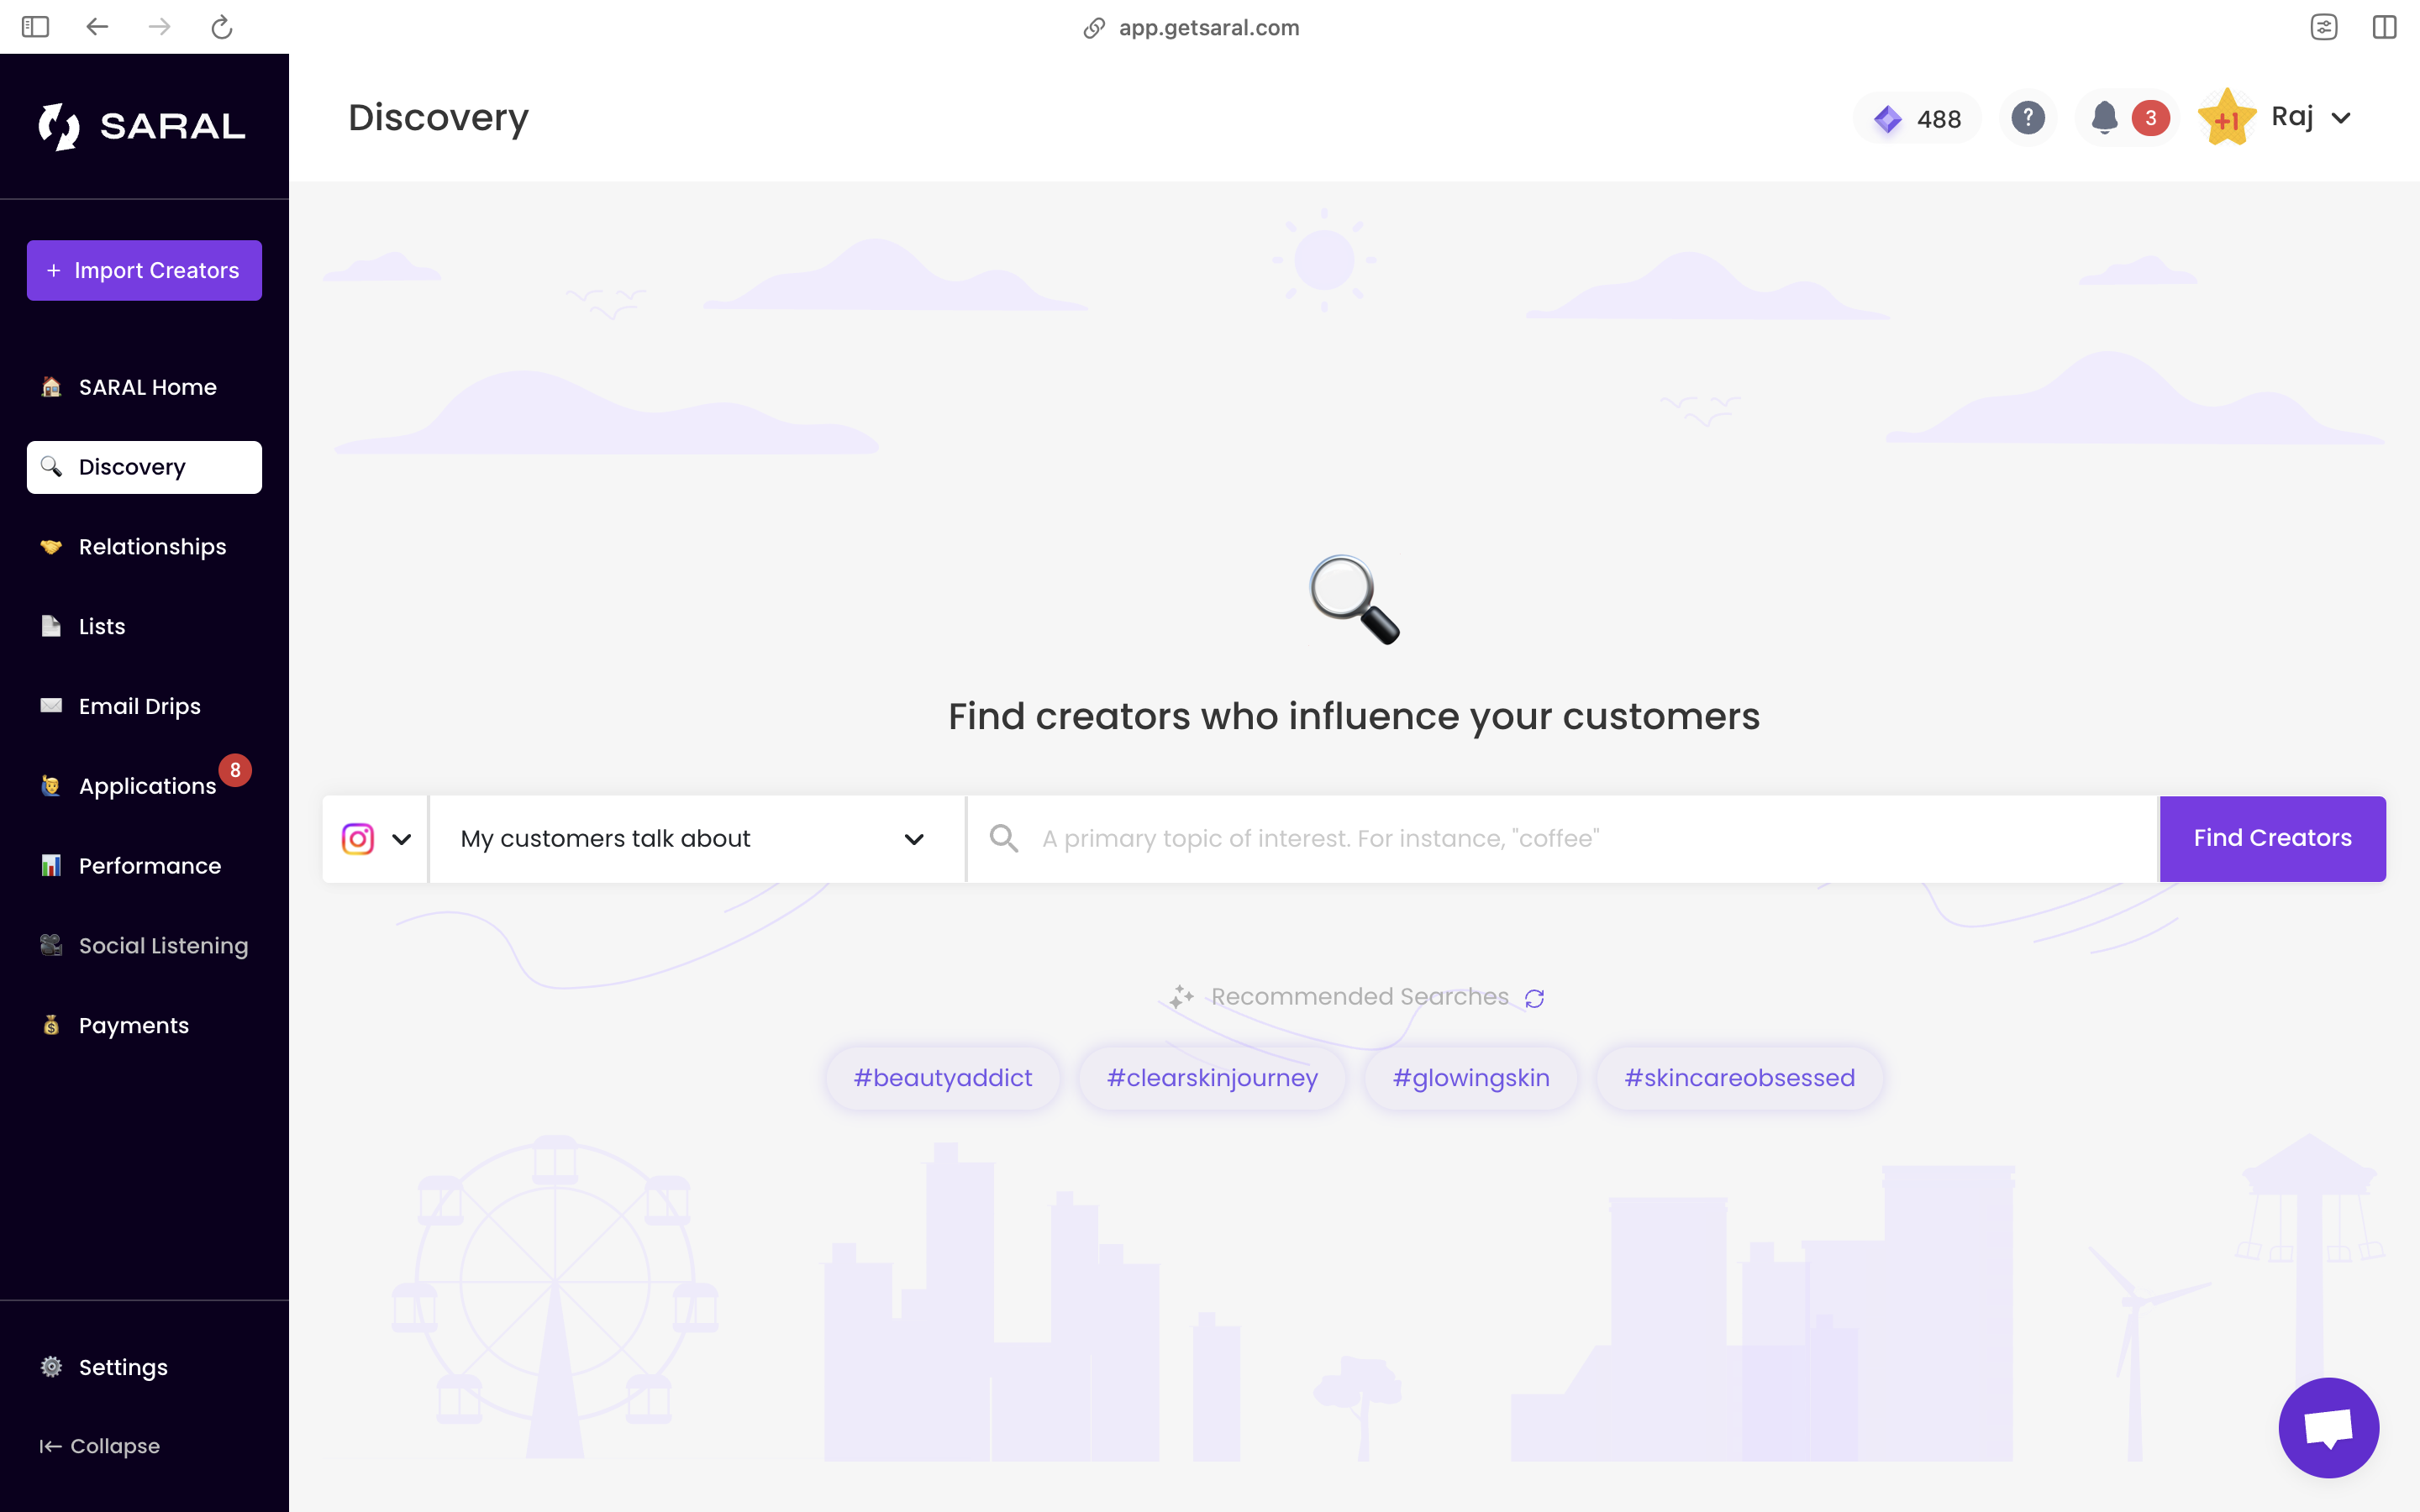 Find millions of influencers from anywhere in the world for your brand with just a single search 